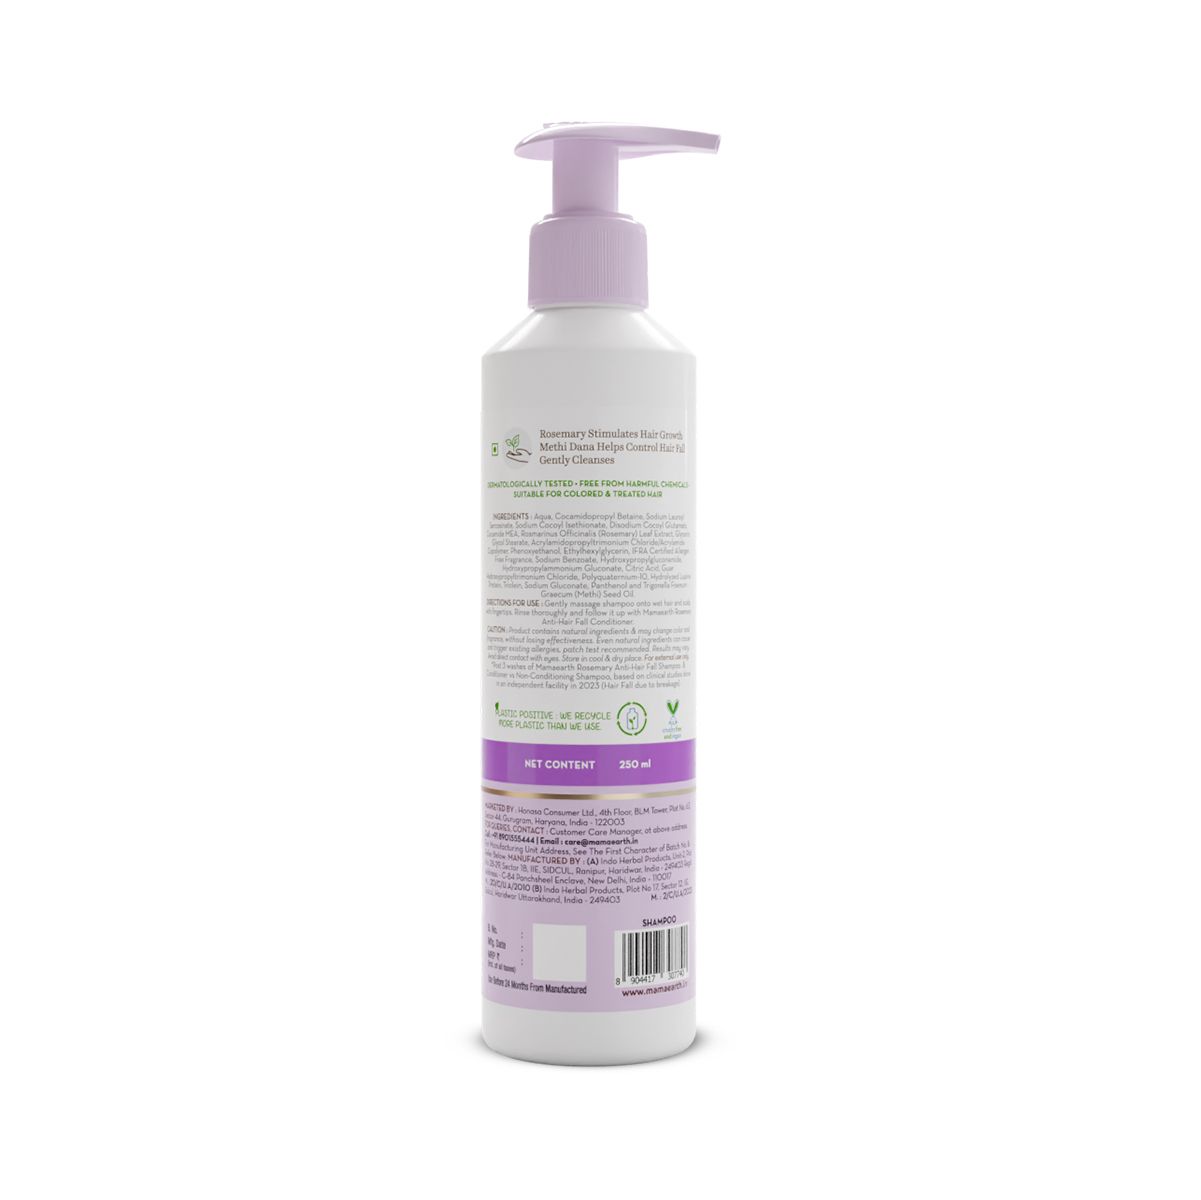 PHY Hair Fall Defense Conditioner  Onion  Ginseng  Reduces Hair Fal